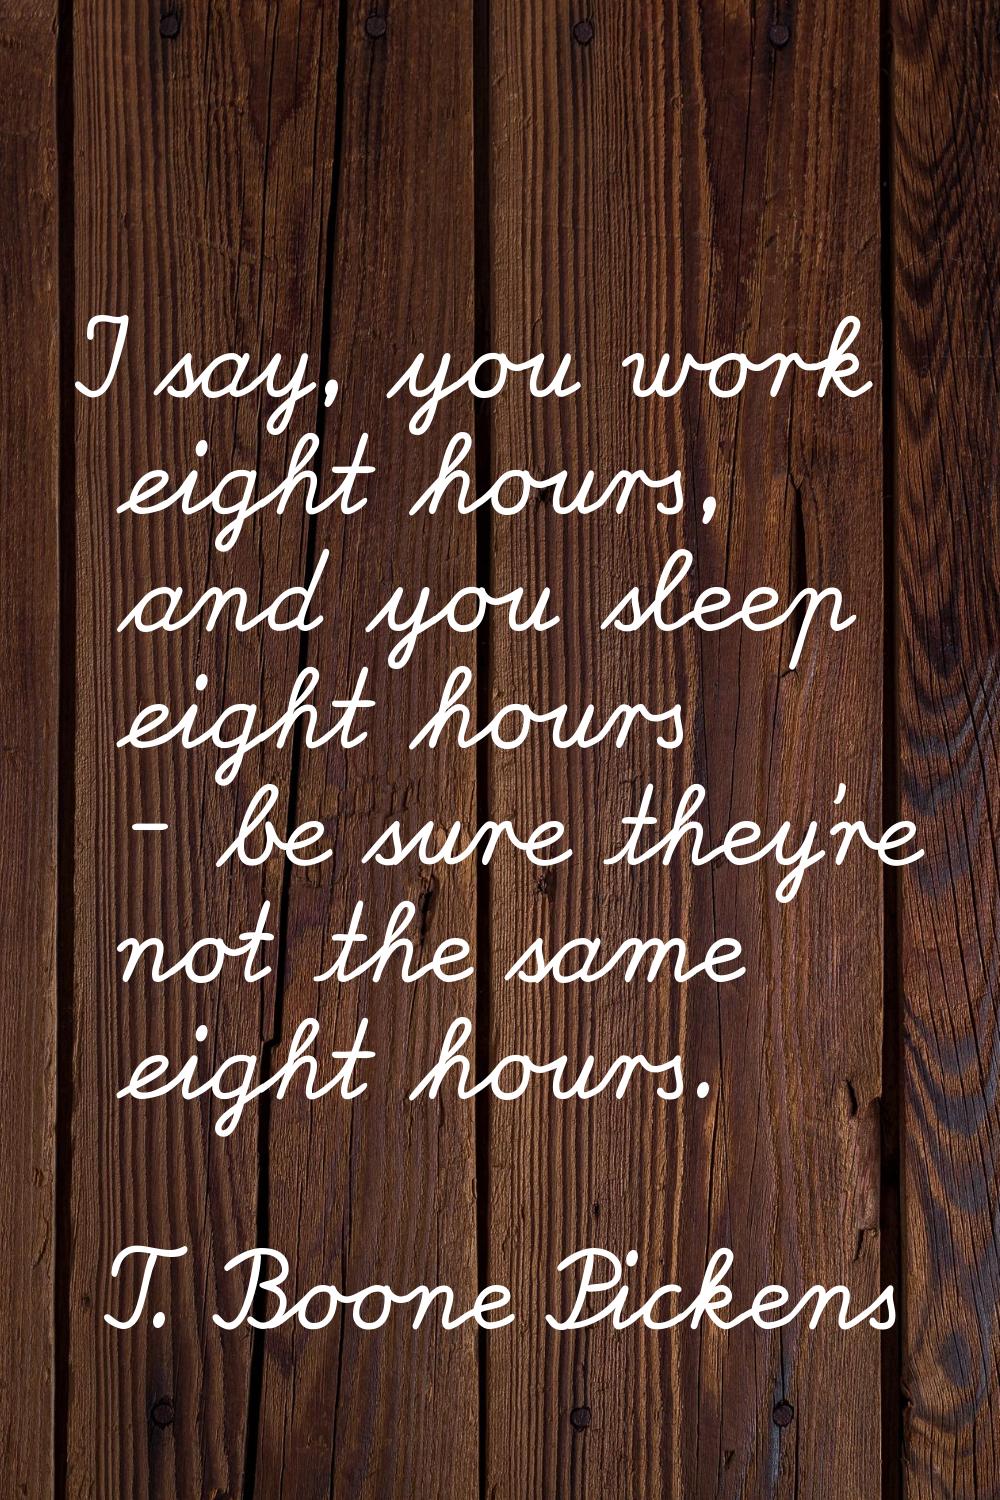 I say, you work eight hours, and you sleep eight hours - be sure they're not the same eight hours.